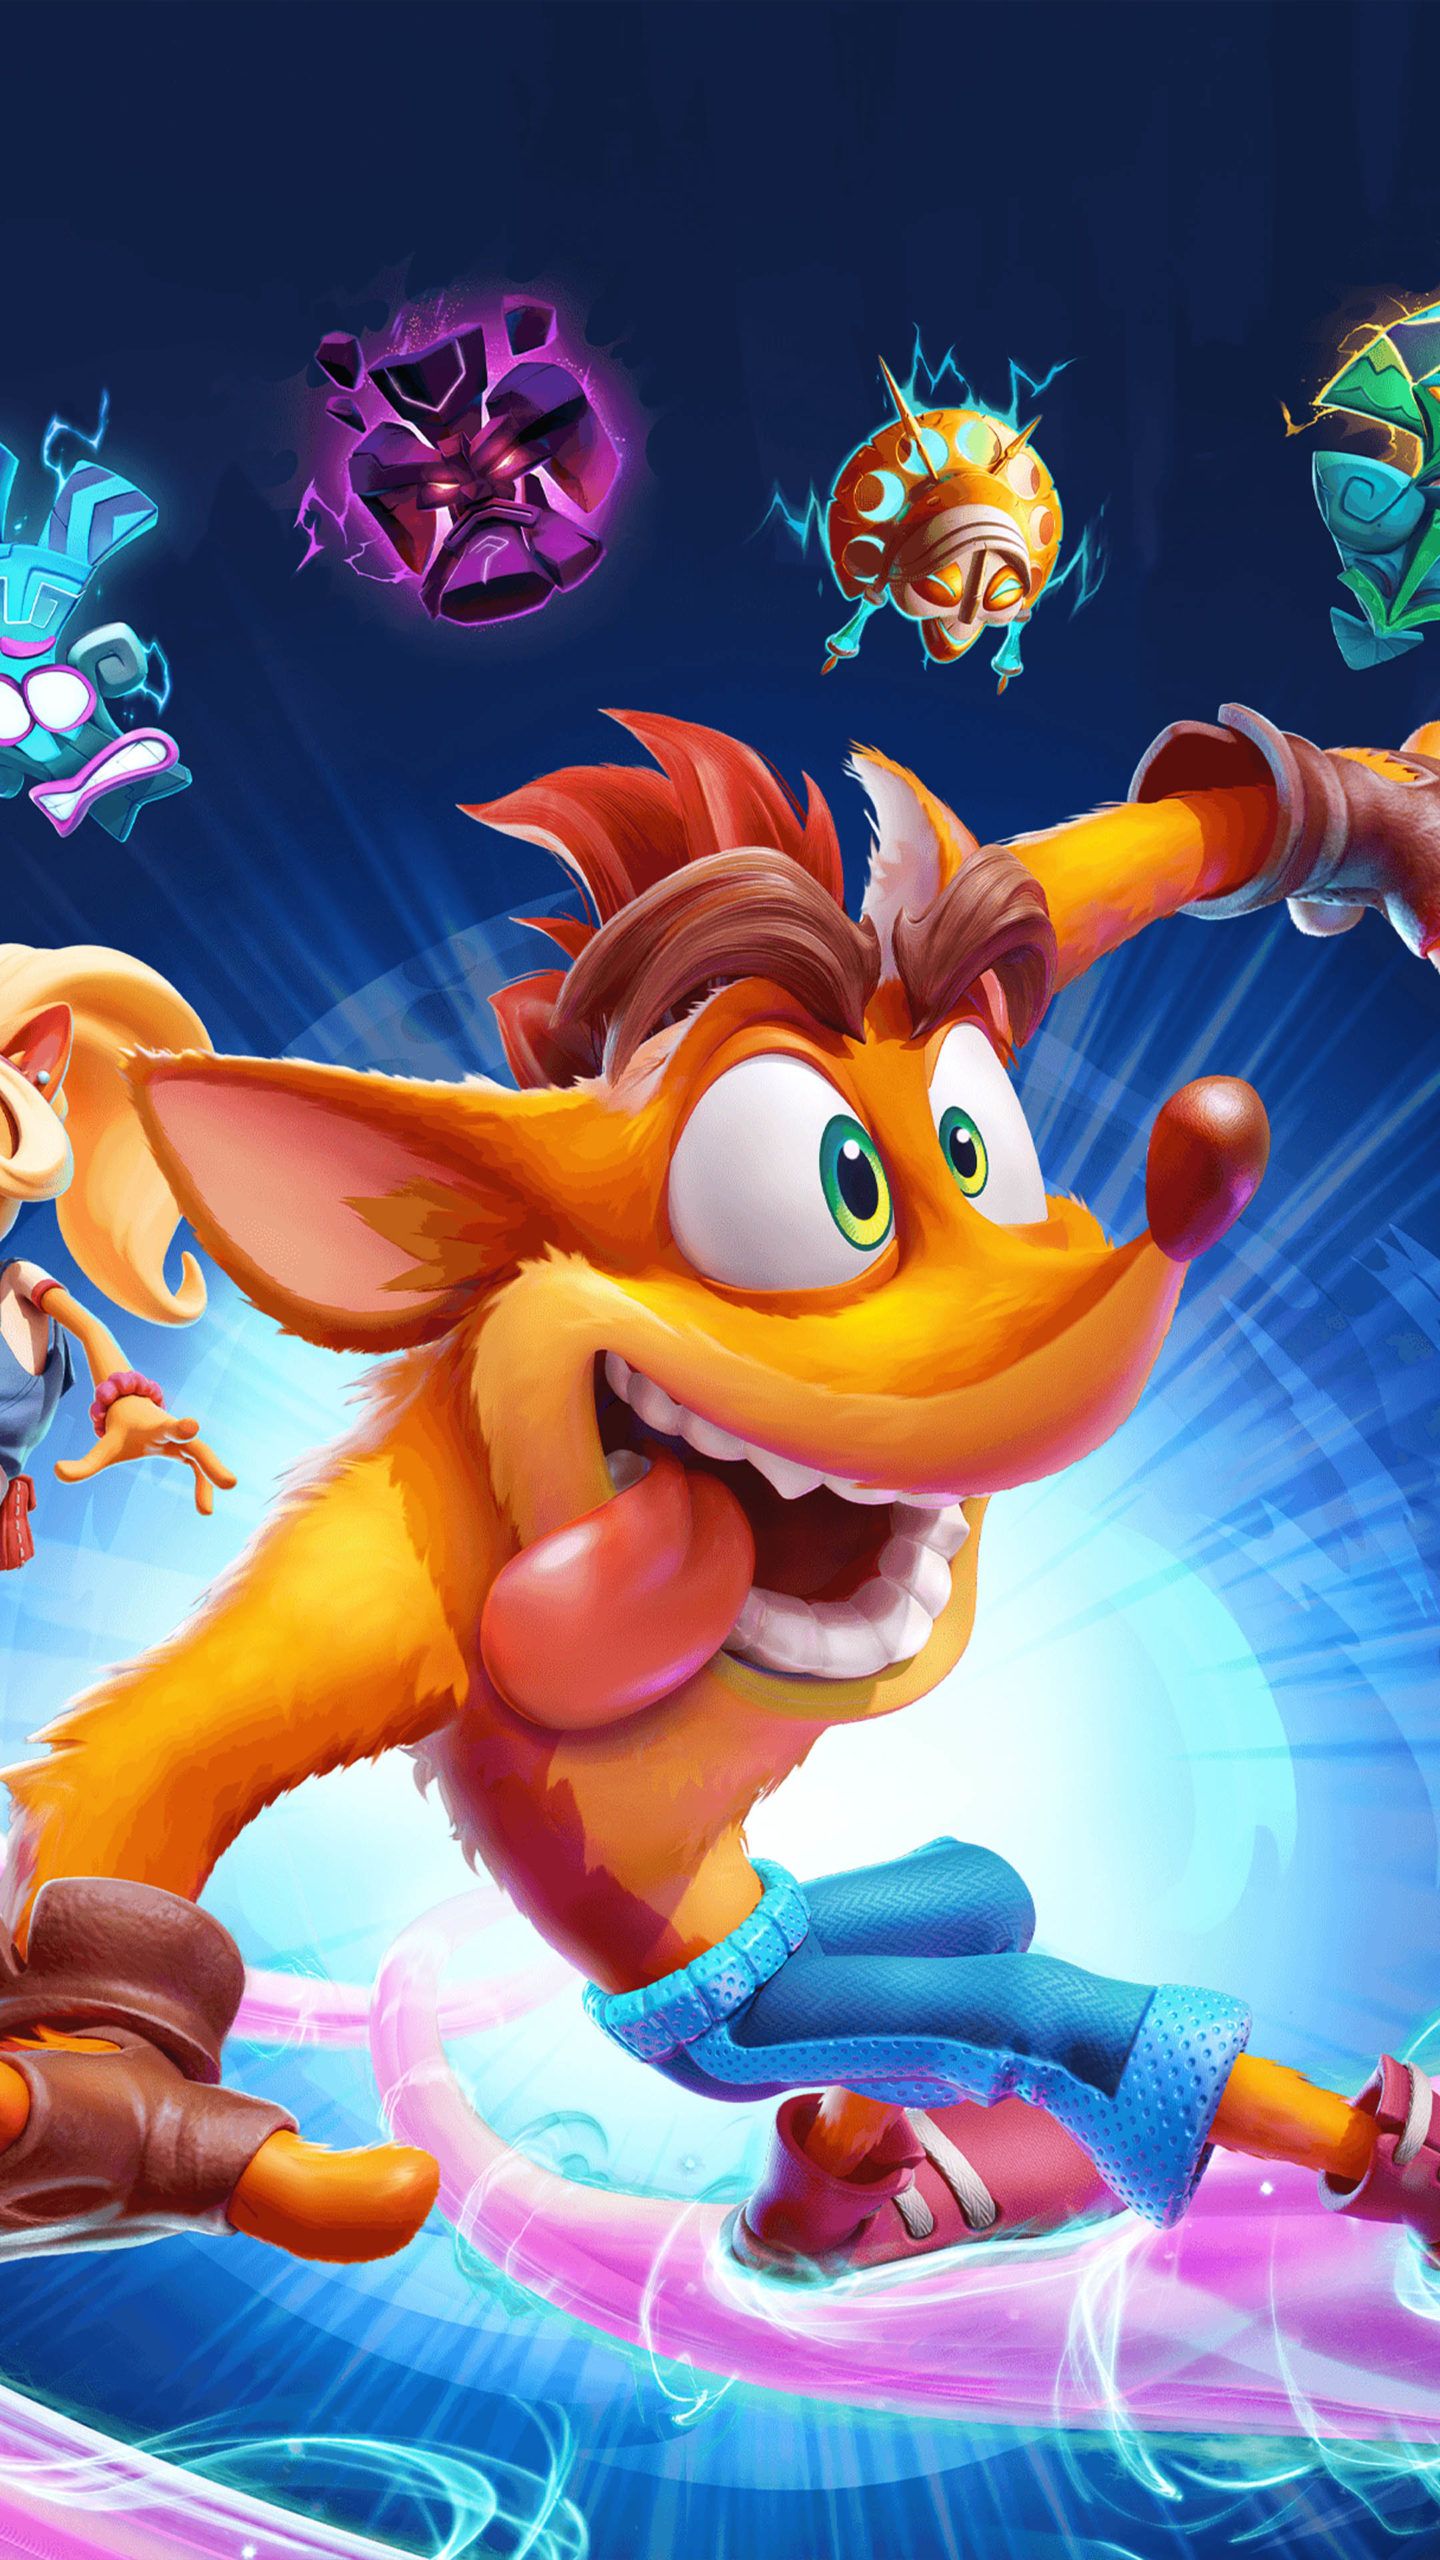 Crash Bandicoot 4 Its About Time Game Poster 4K Ultra HD Mobile